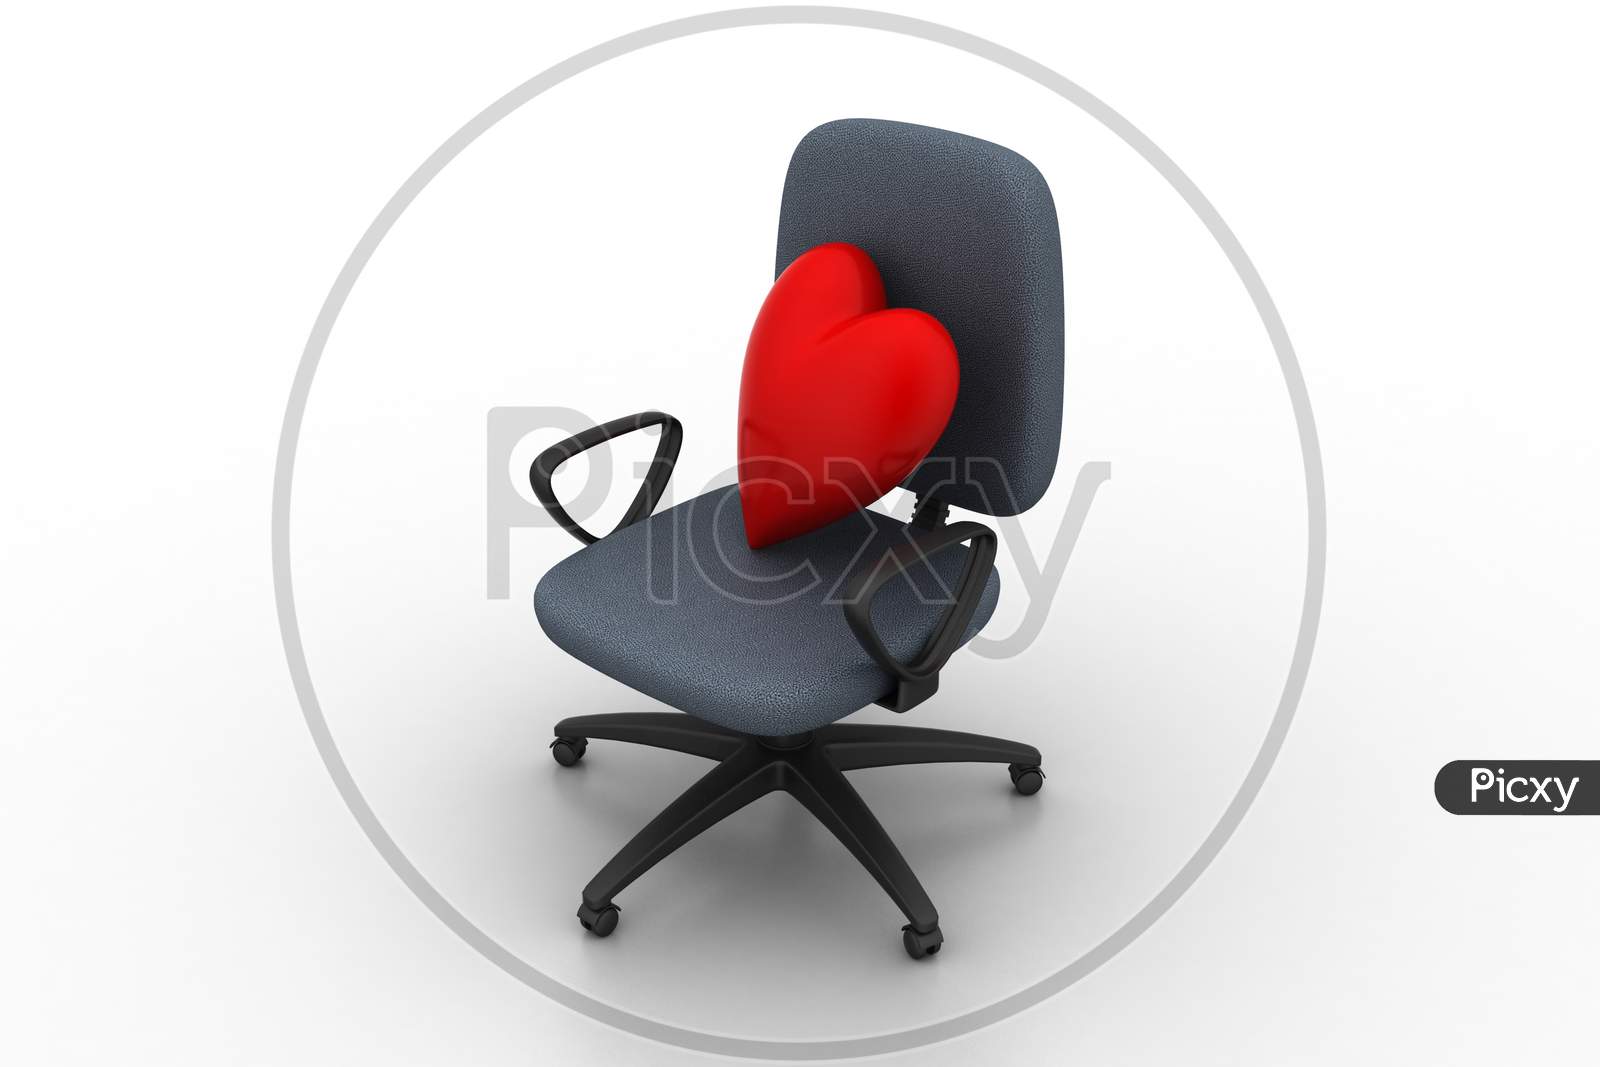 Heart Sign In Chair